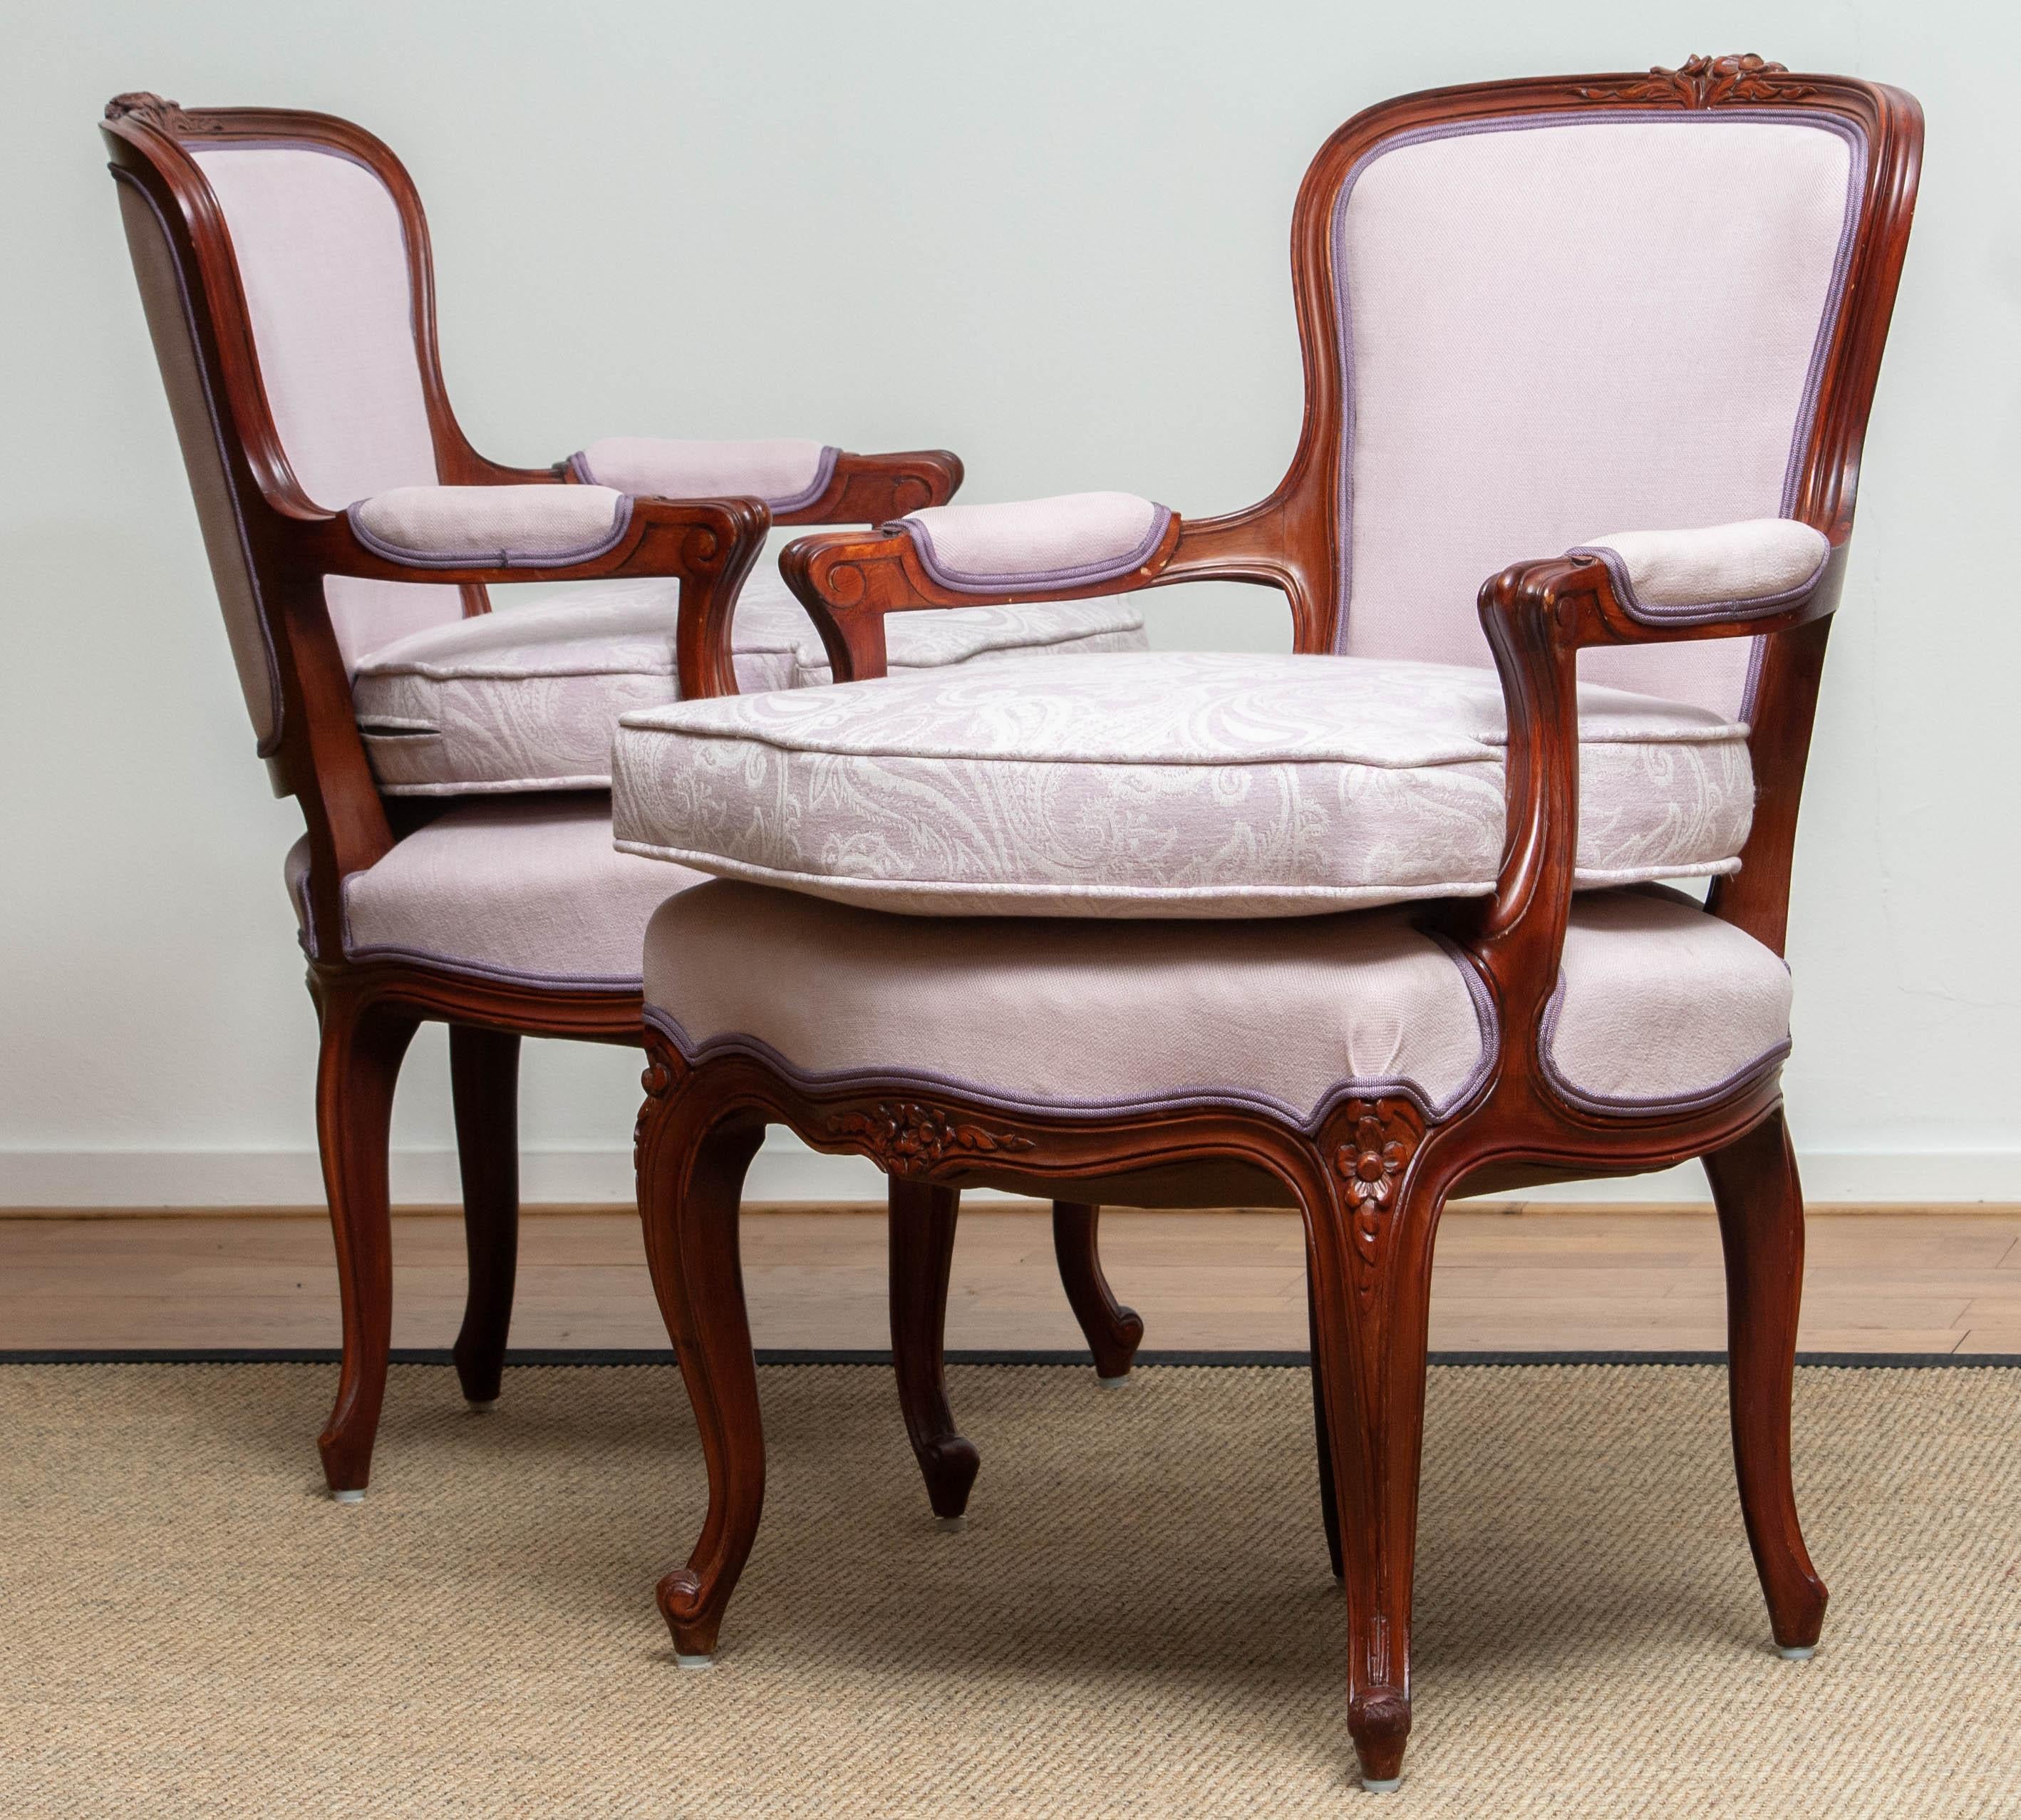 1950s, Pair of Pink Swedish Rococo Bergères in the Shabby Chic Technique Chairs 1